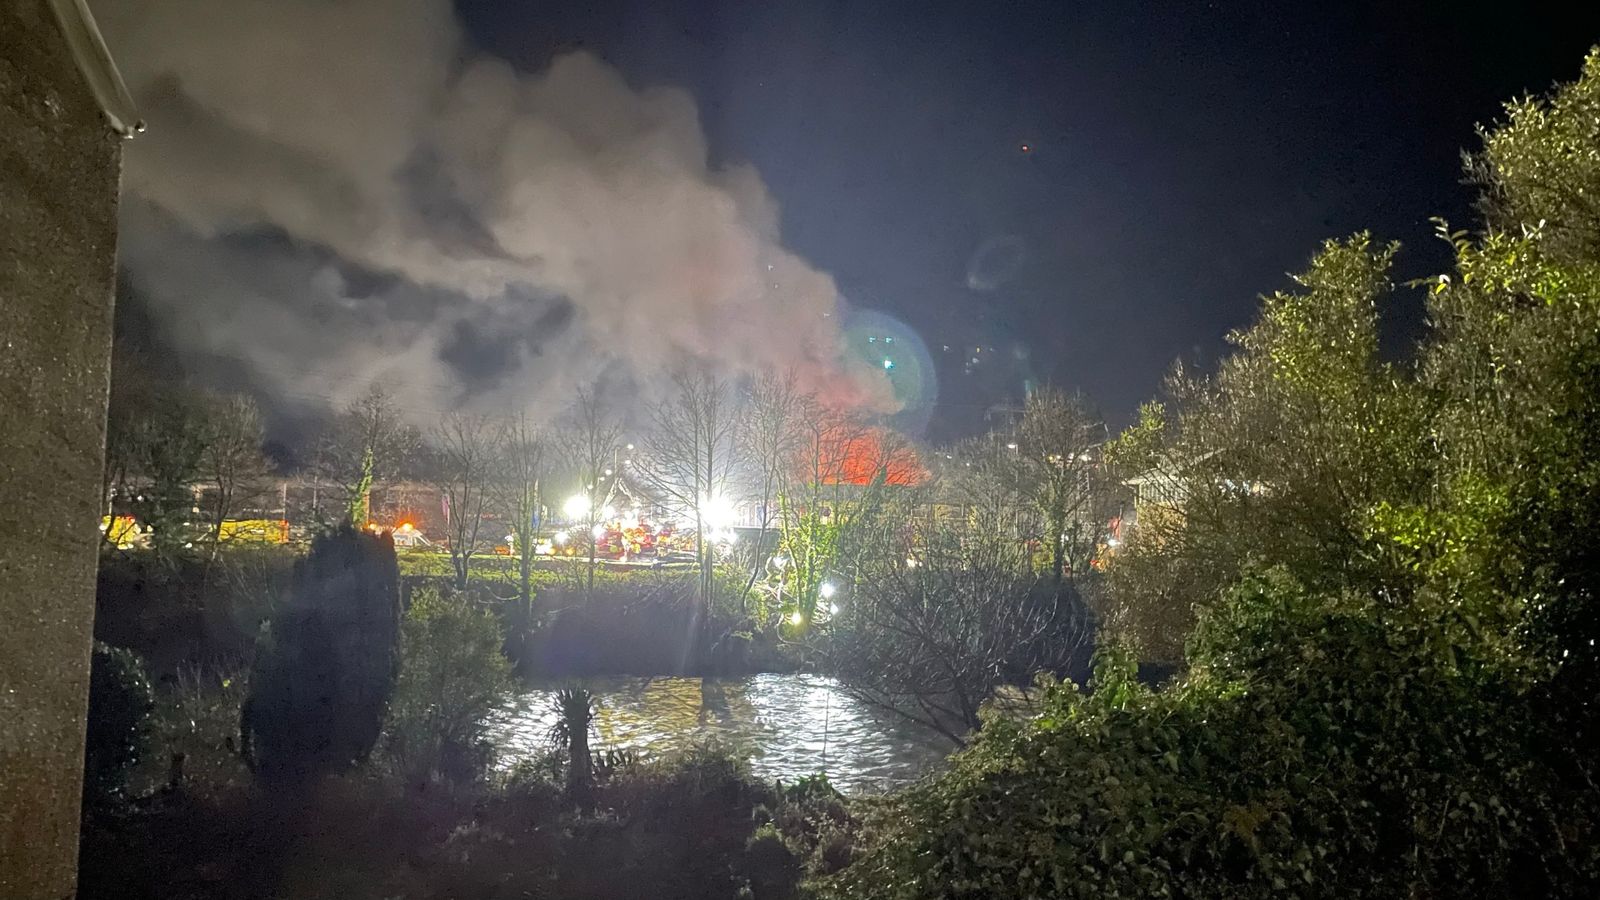 Treforest fire: Body found after explosion on industrial estate